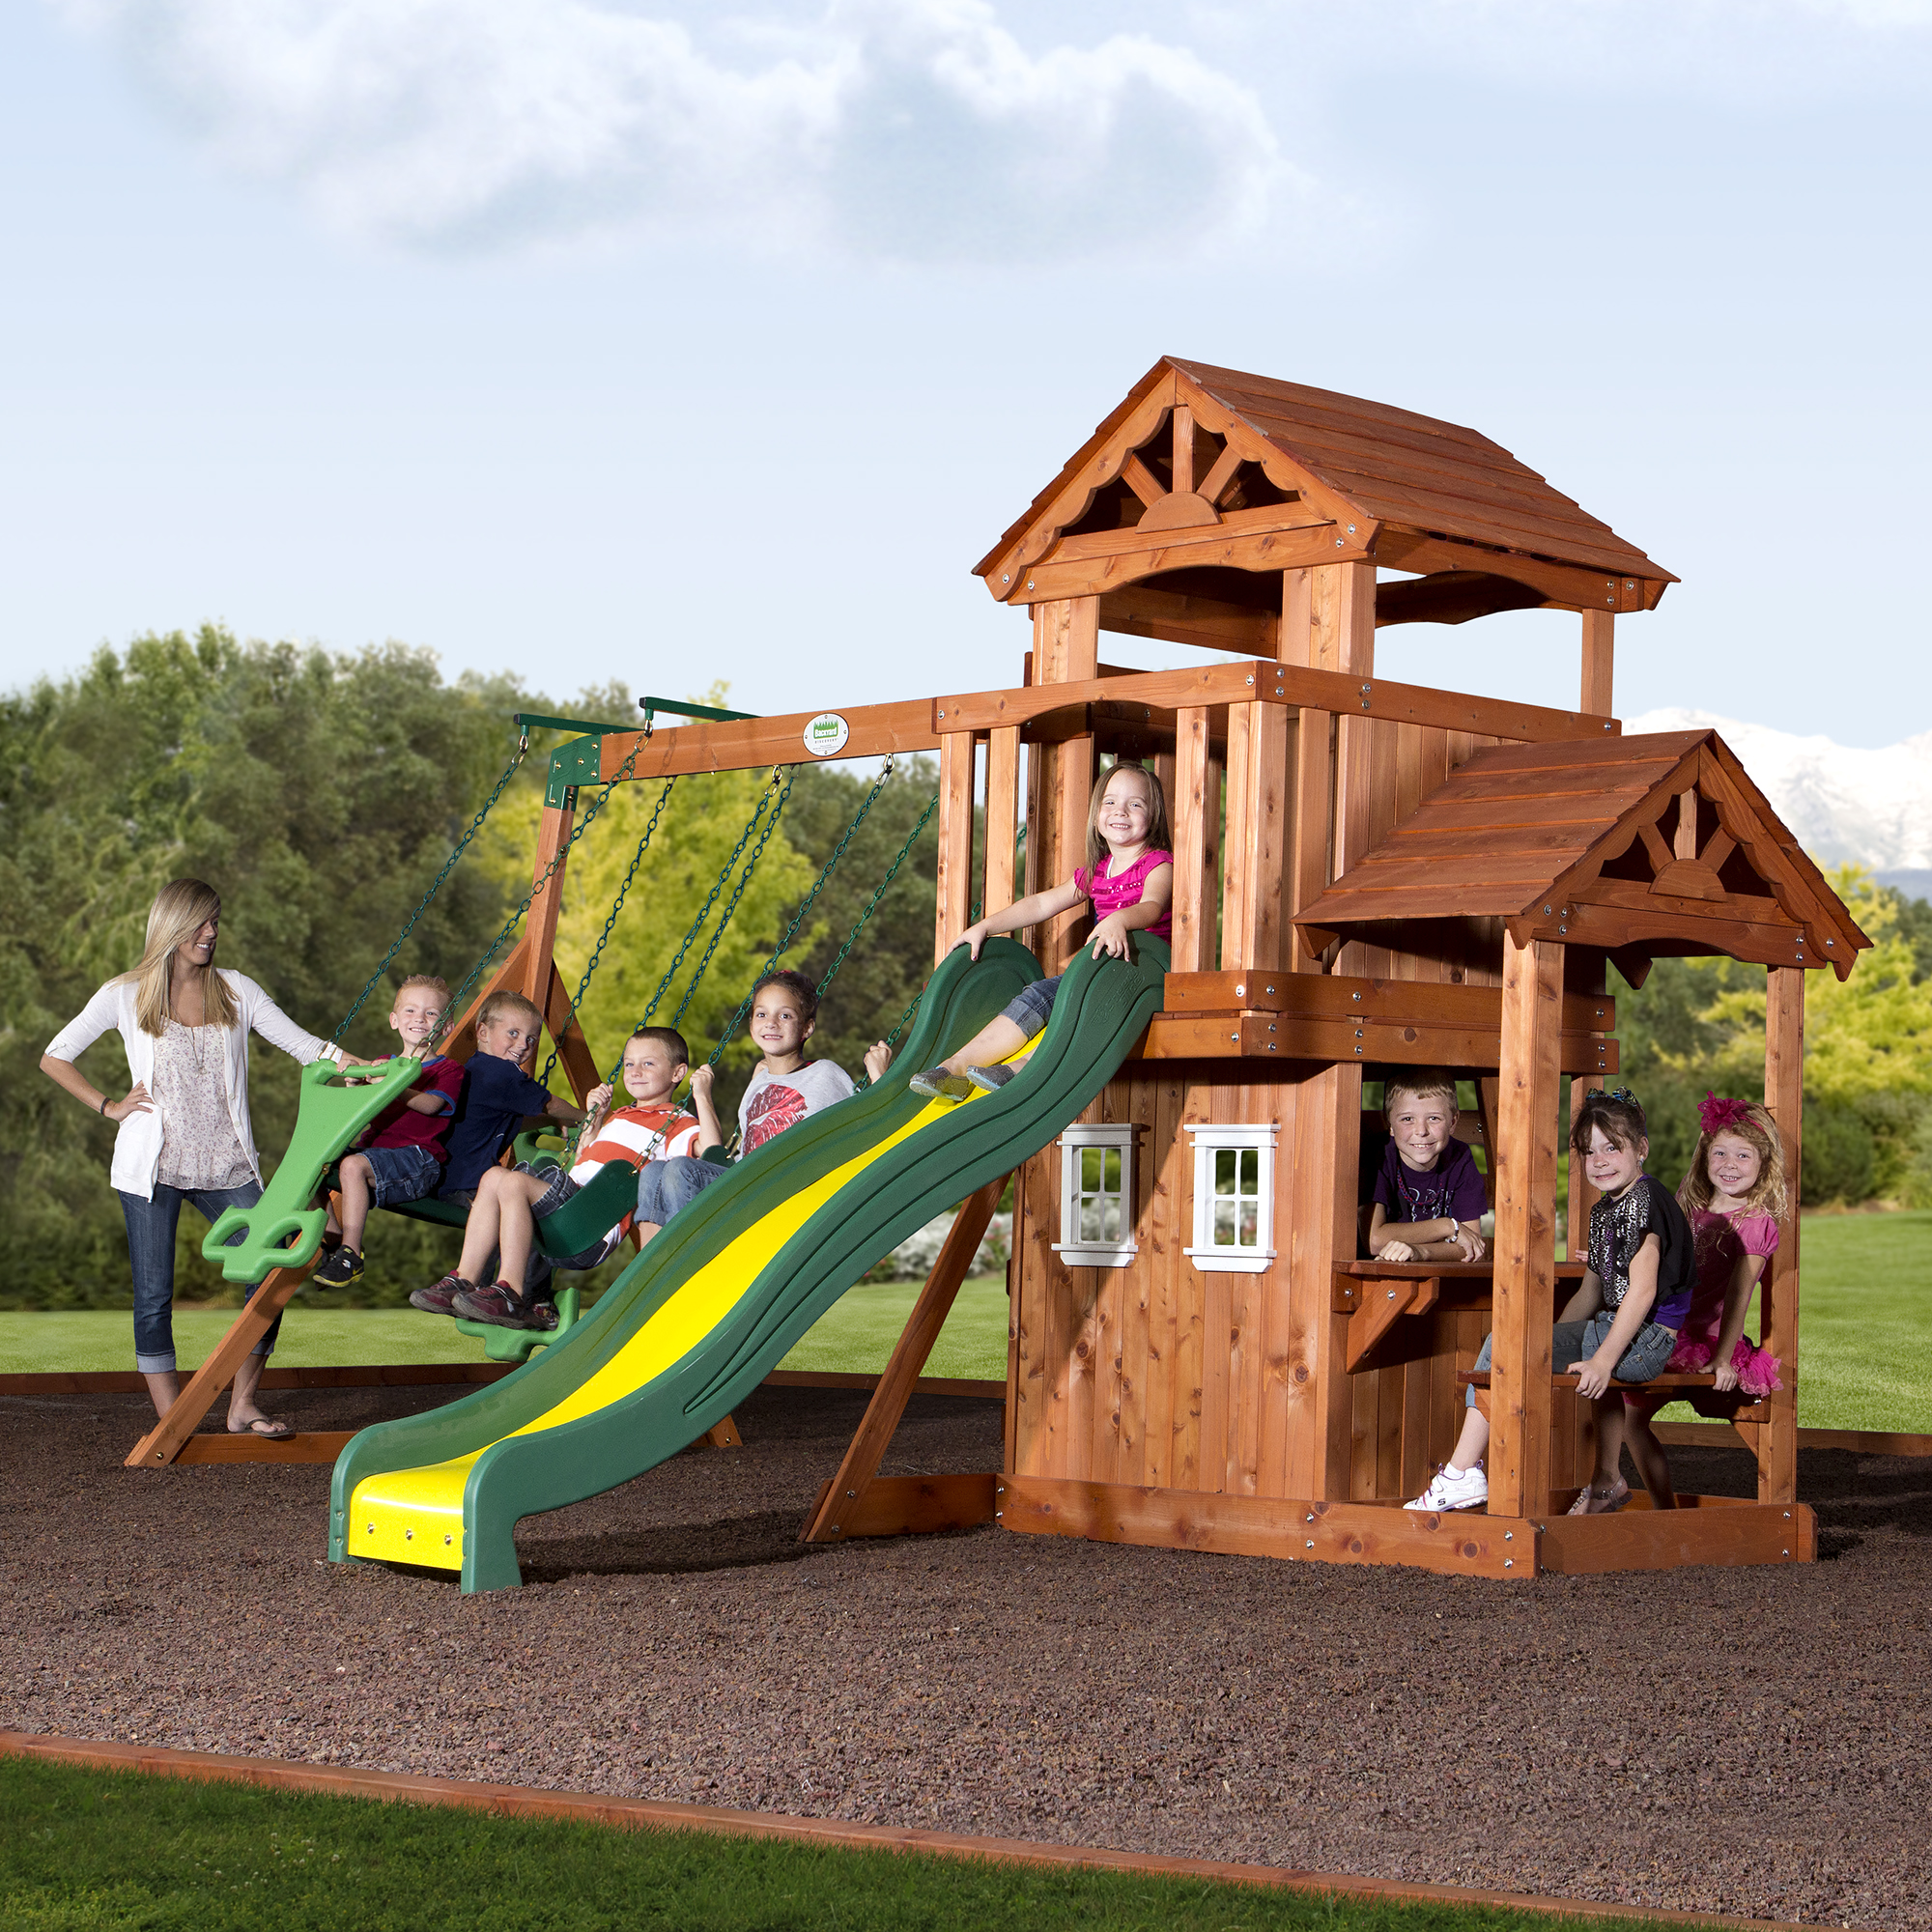 Backyard Discovery Tanglewood Cedar Wood Swing Set with Built-in Bench, Wood Roof Overhead